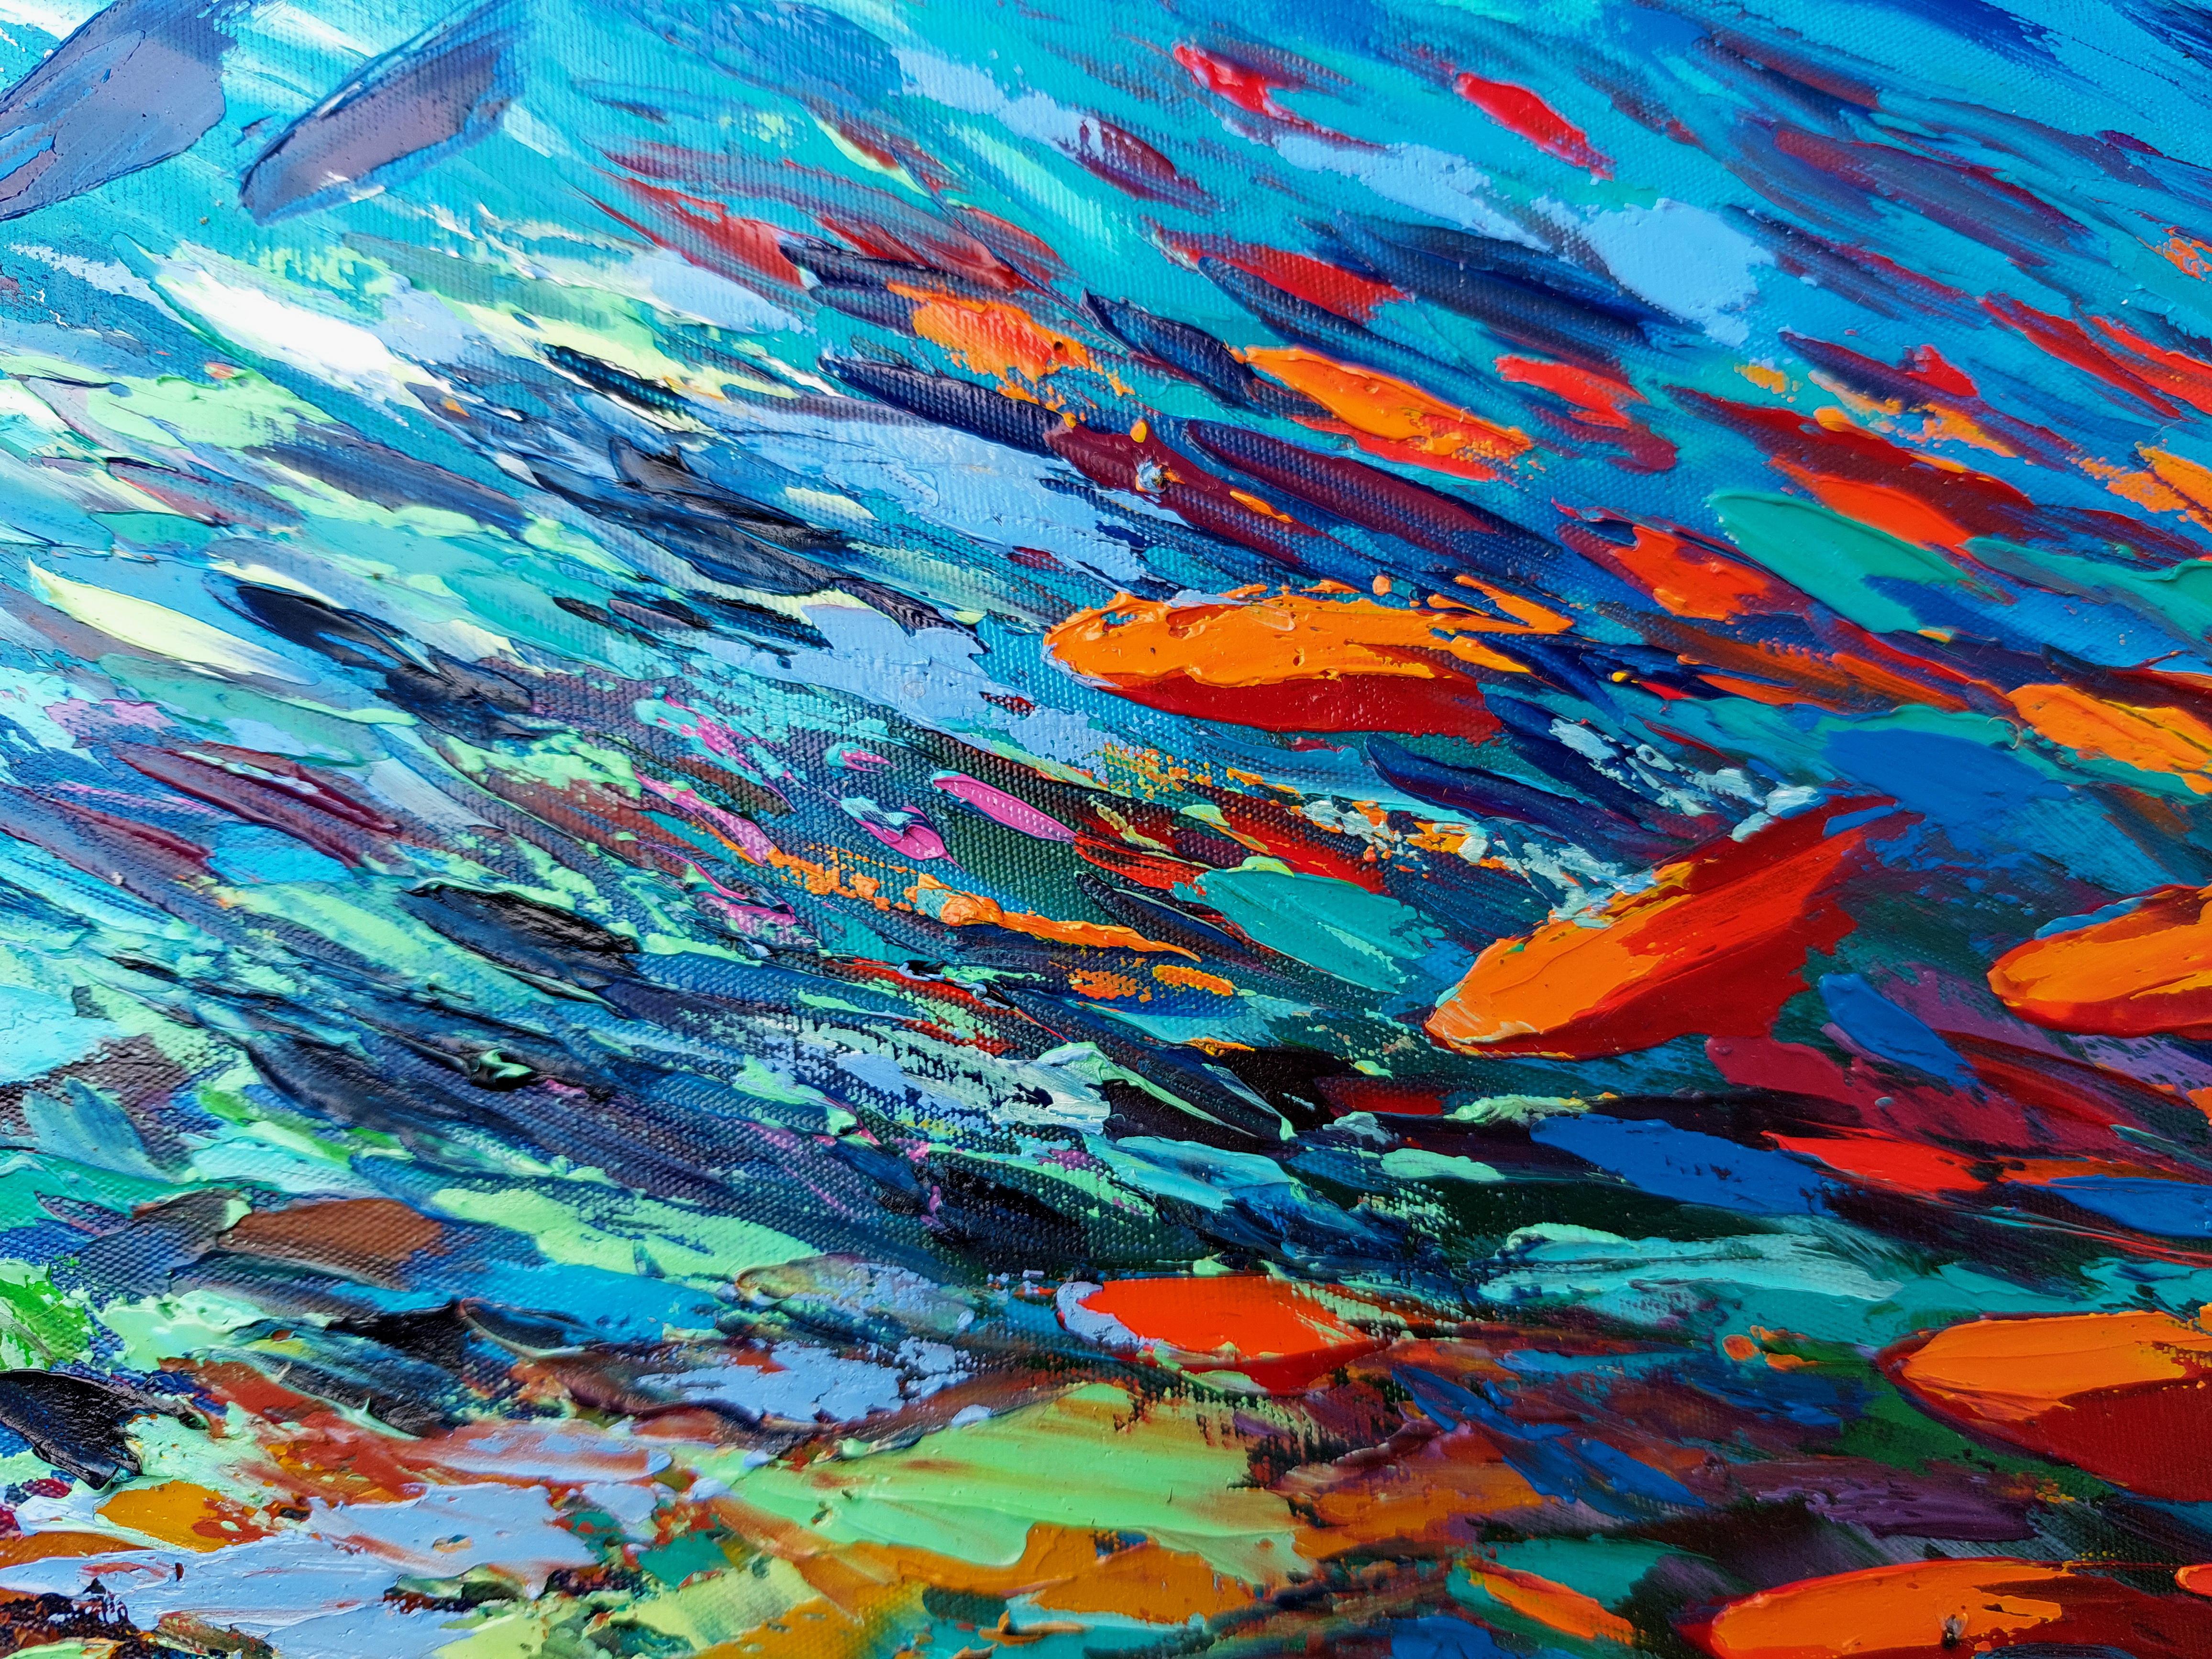 * Title: Hawaii Coral Reef
* Size: 12 x 8 inches
* Materials: oil, stretched canvas, palette knife
* Shipping: gallery standards packaging, express shipping
Bright abstract seascape painting will be a good addition to your original oil painting